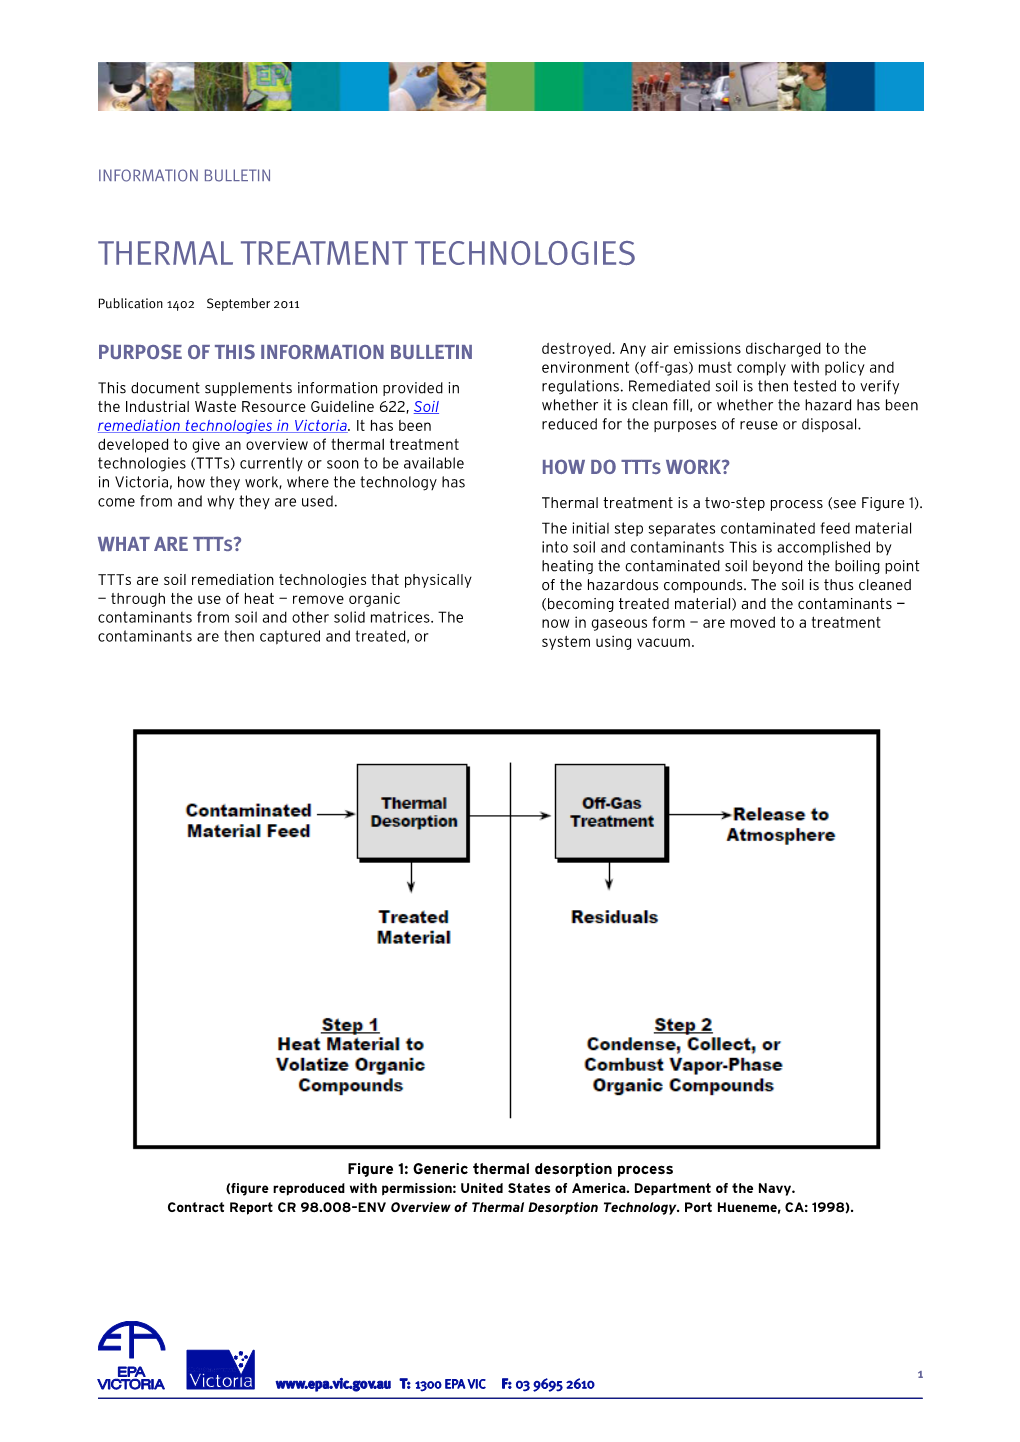 Guide to Thermal Treatment Technologies